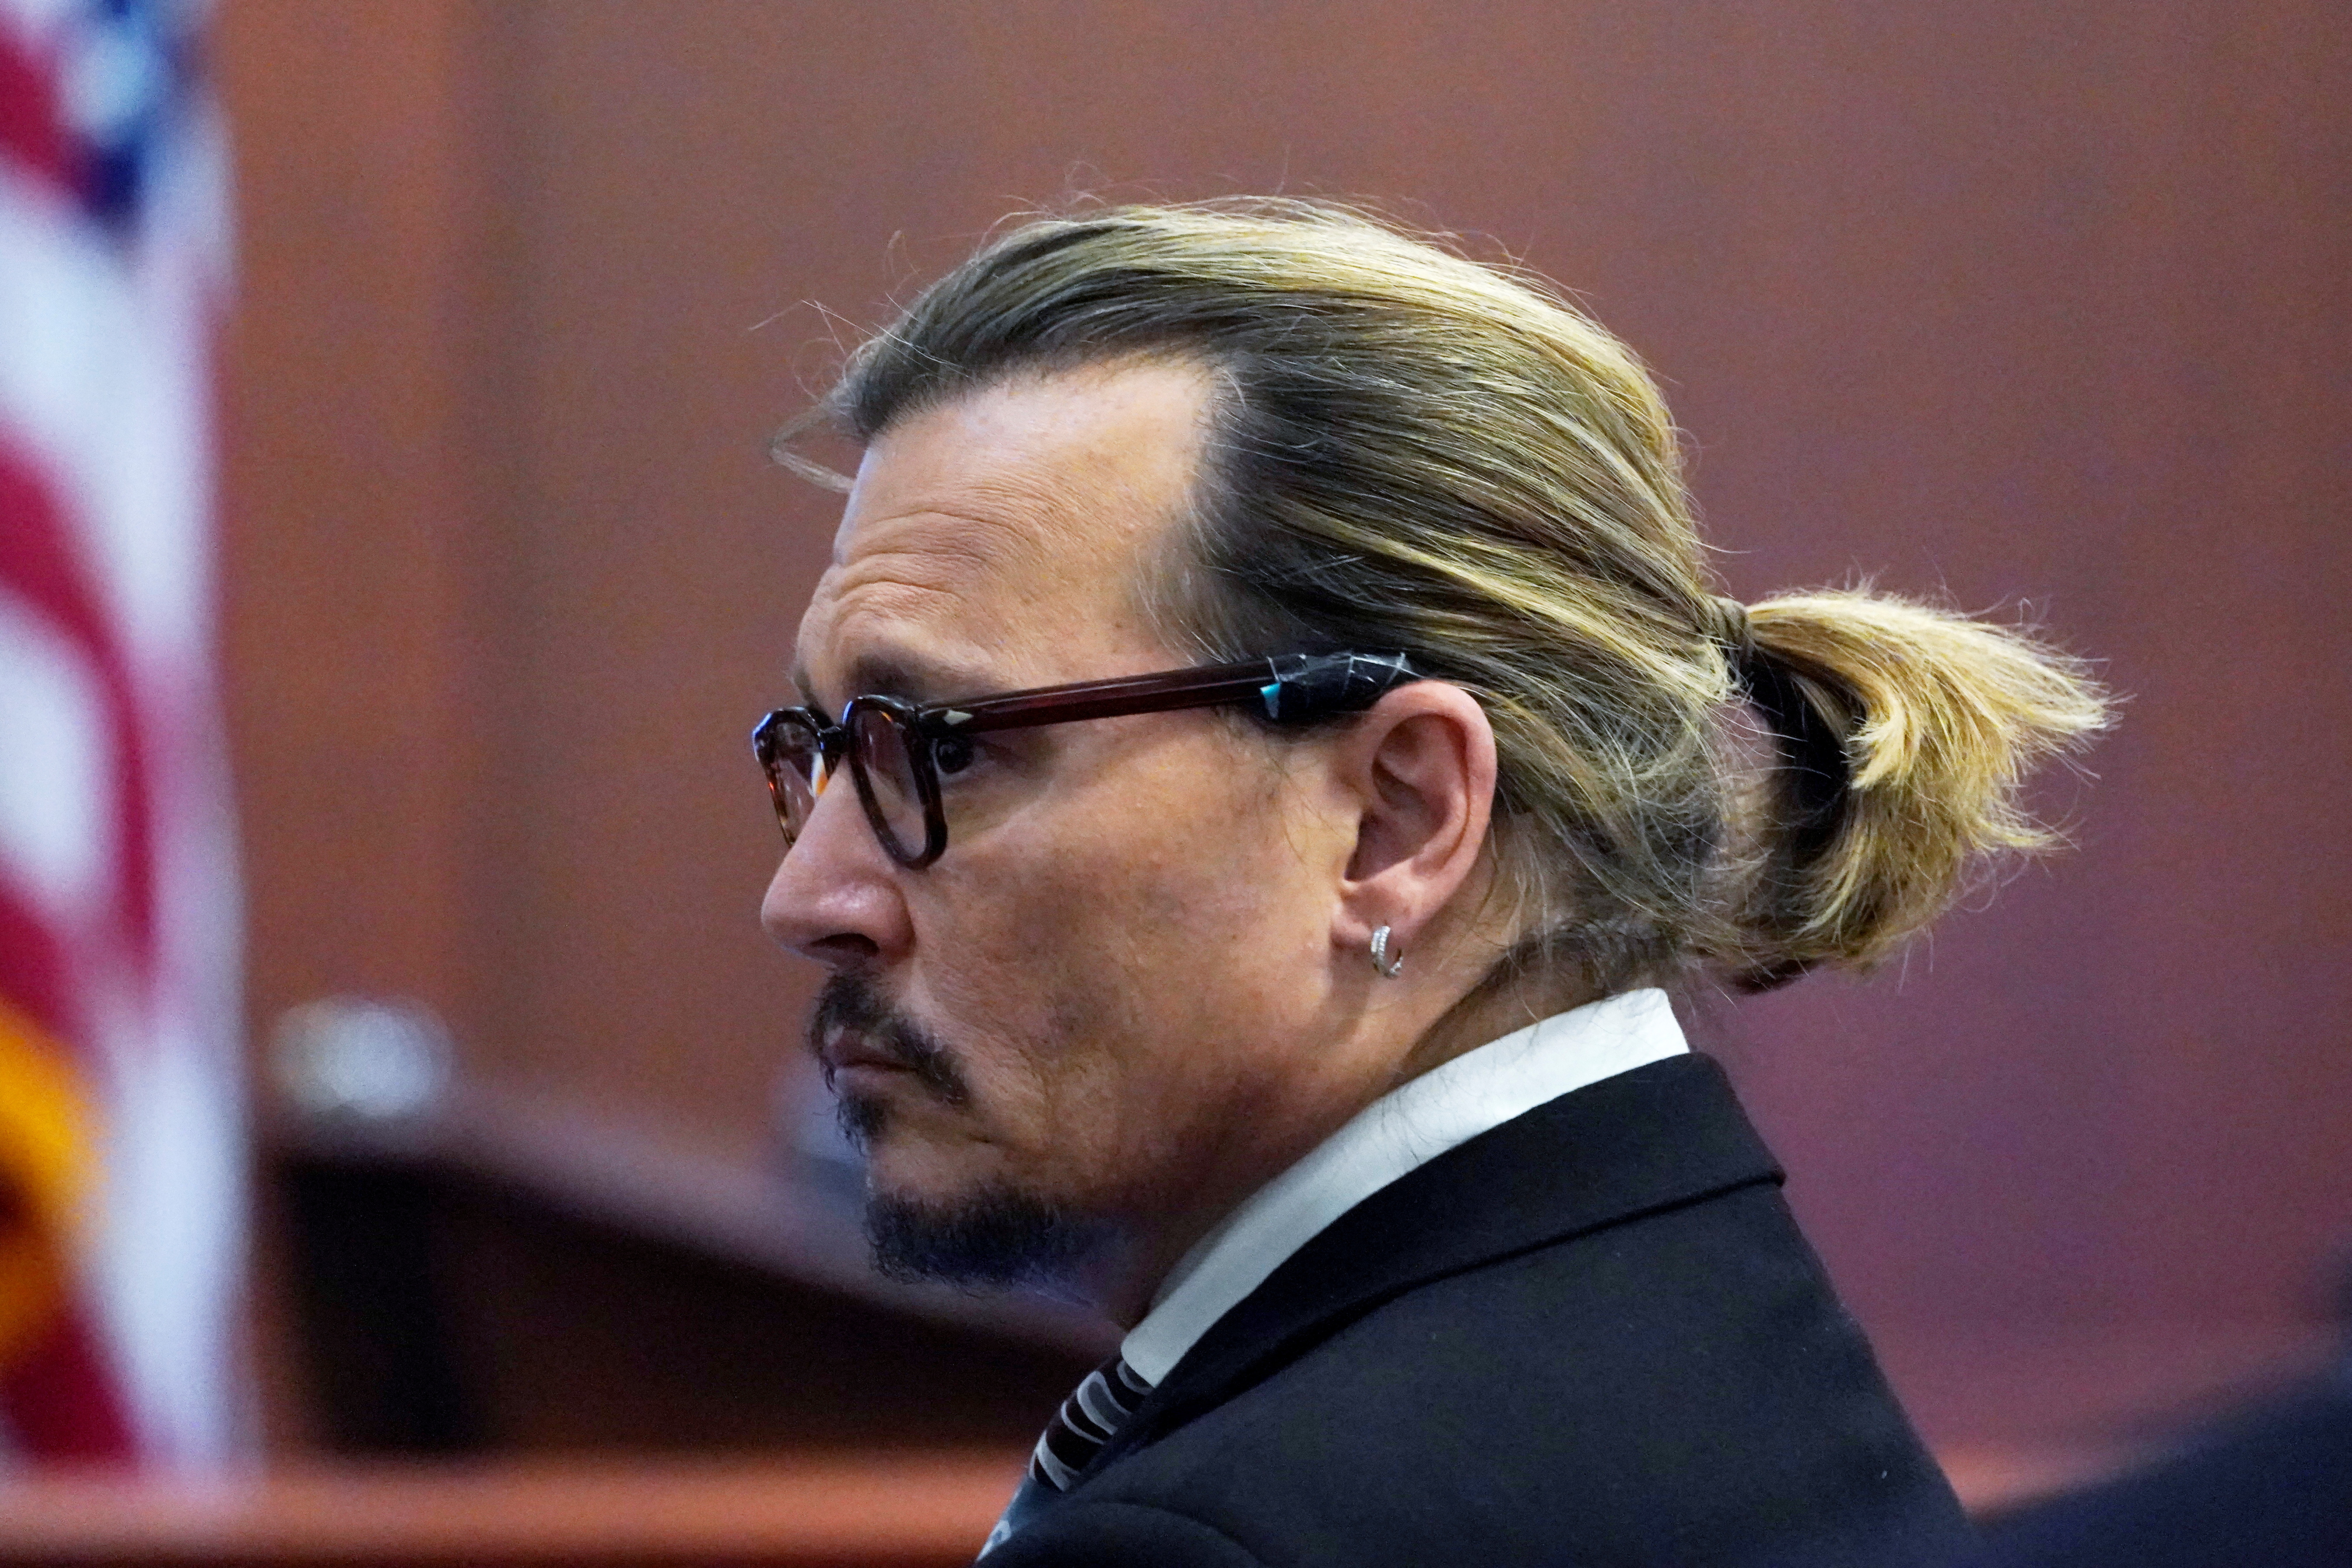 Actor Johnny Depp has sued his ex-wife Amber Heard for defamation (Reuters)